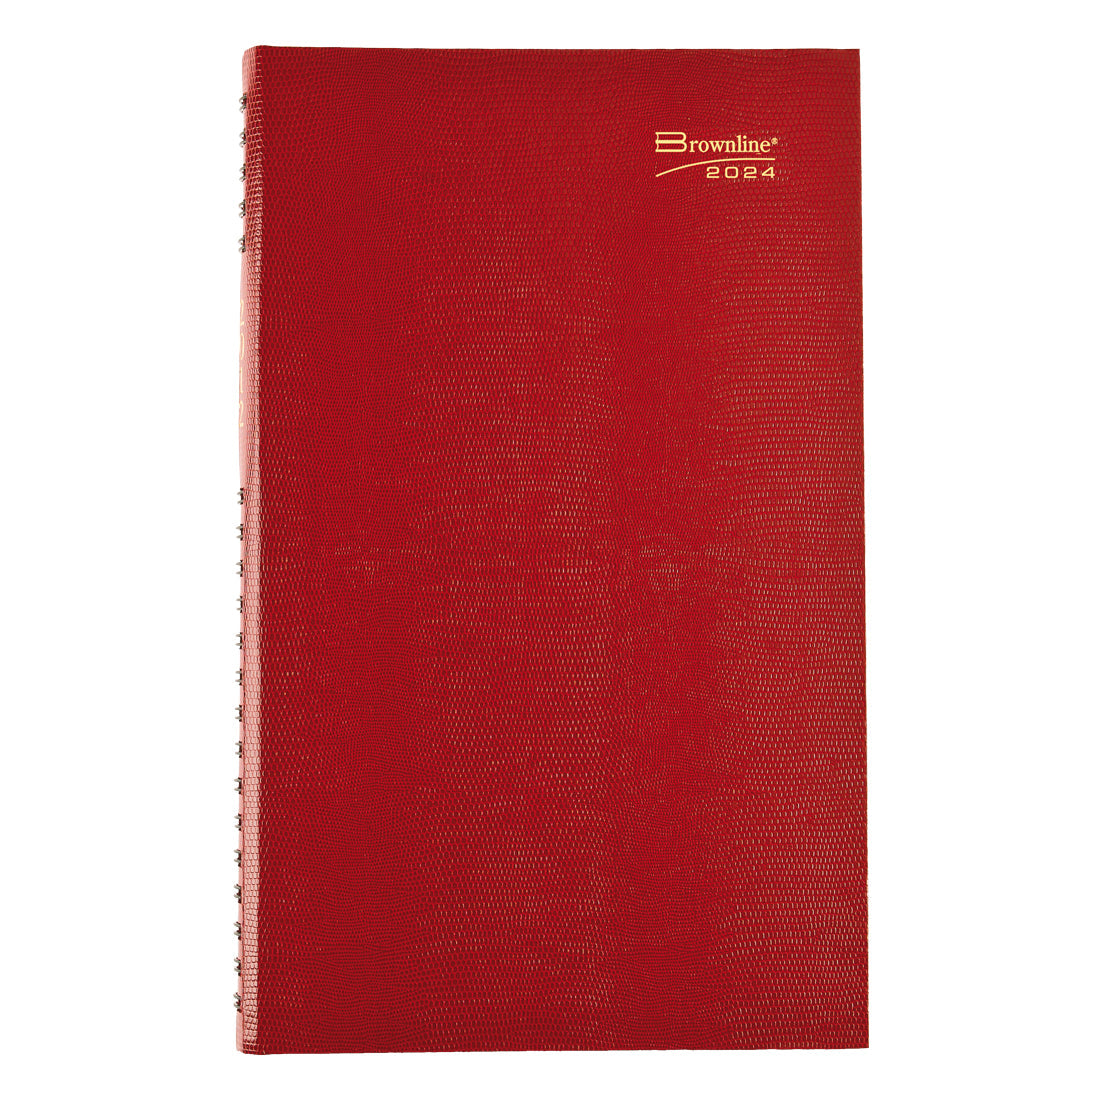 2024 Brownline CBE514 Executive Daily Planner, Hardcover, 10-3/4 x 7-3/4